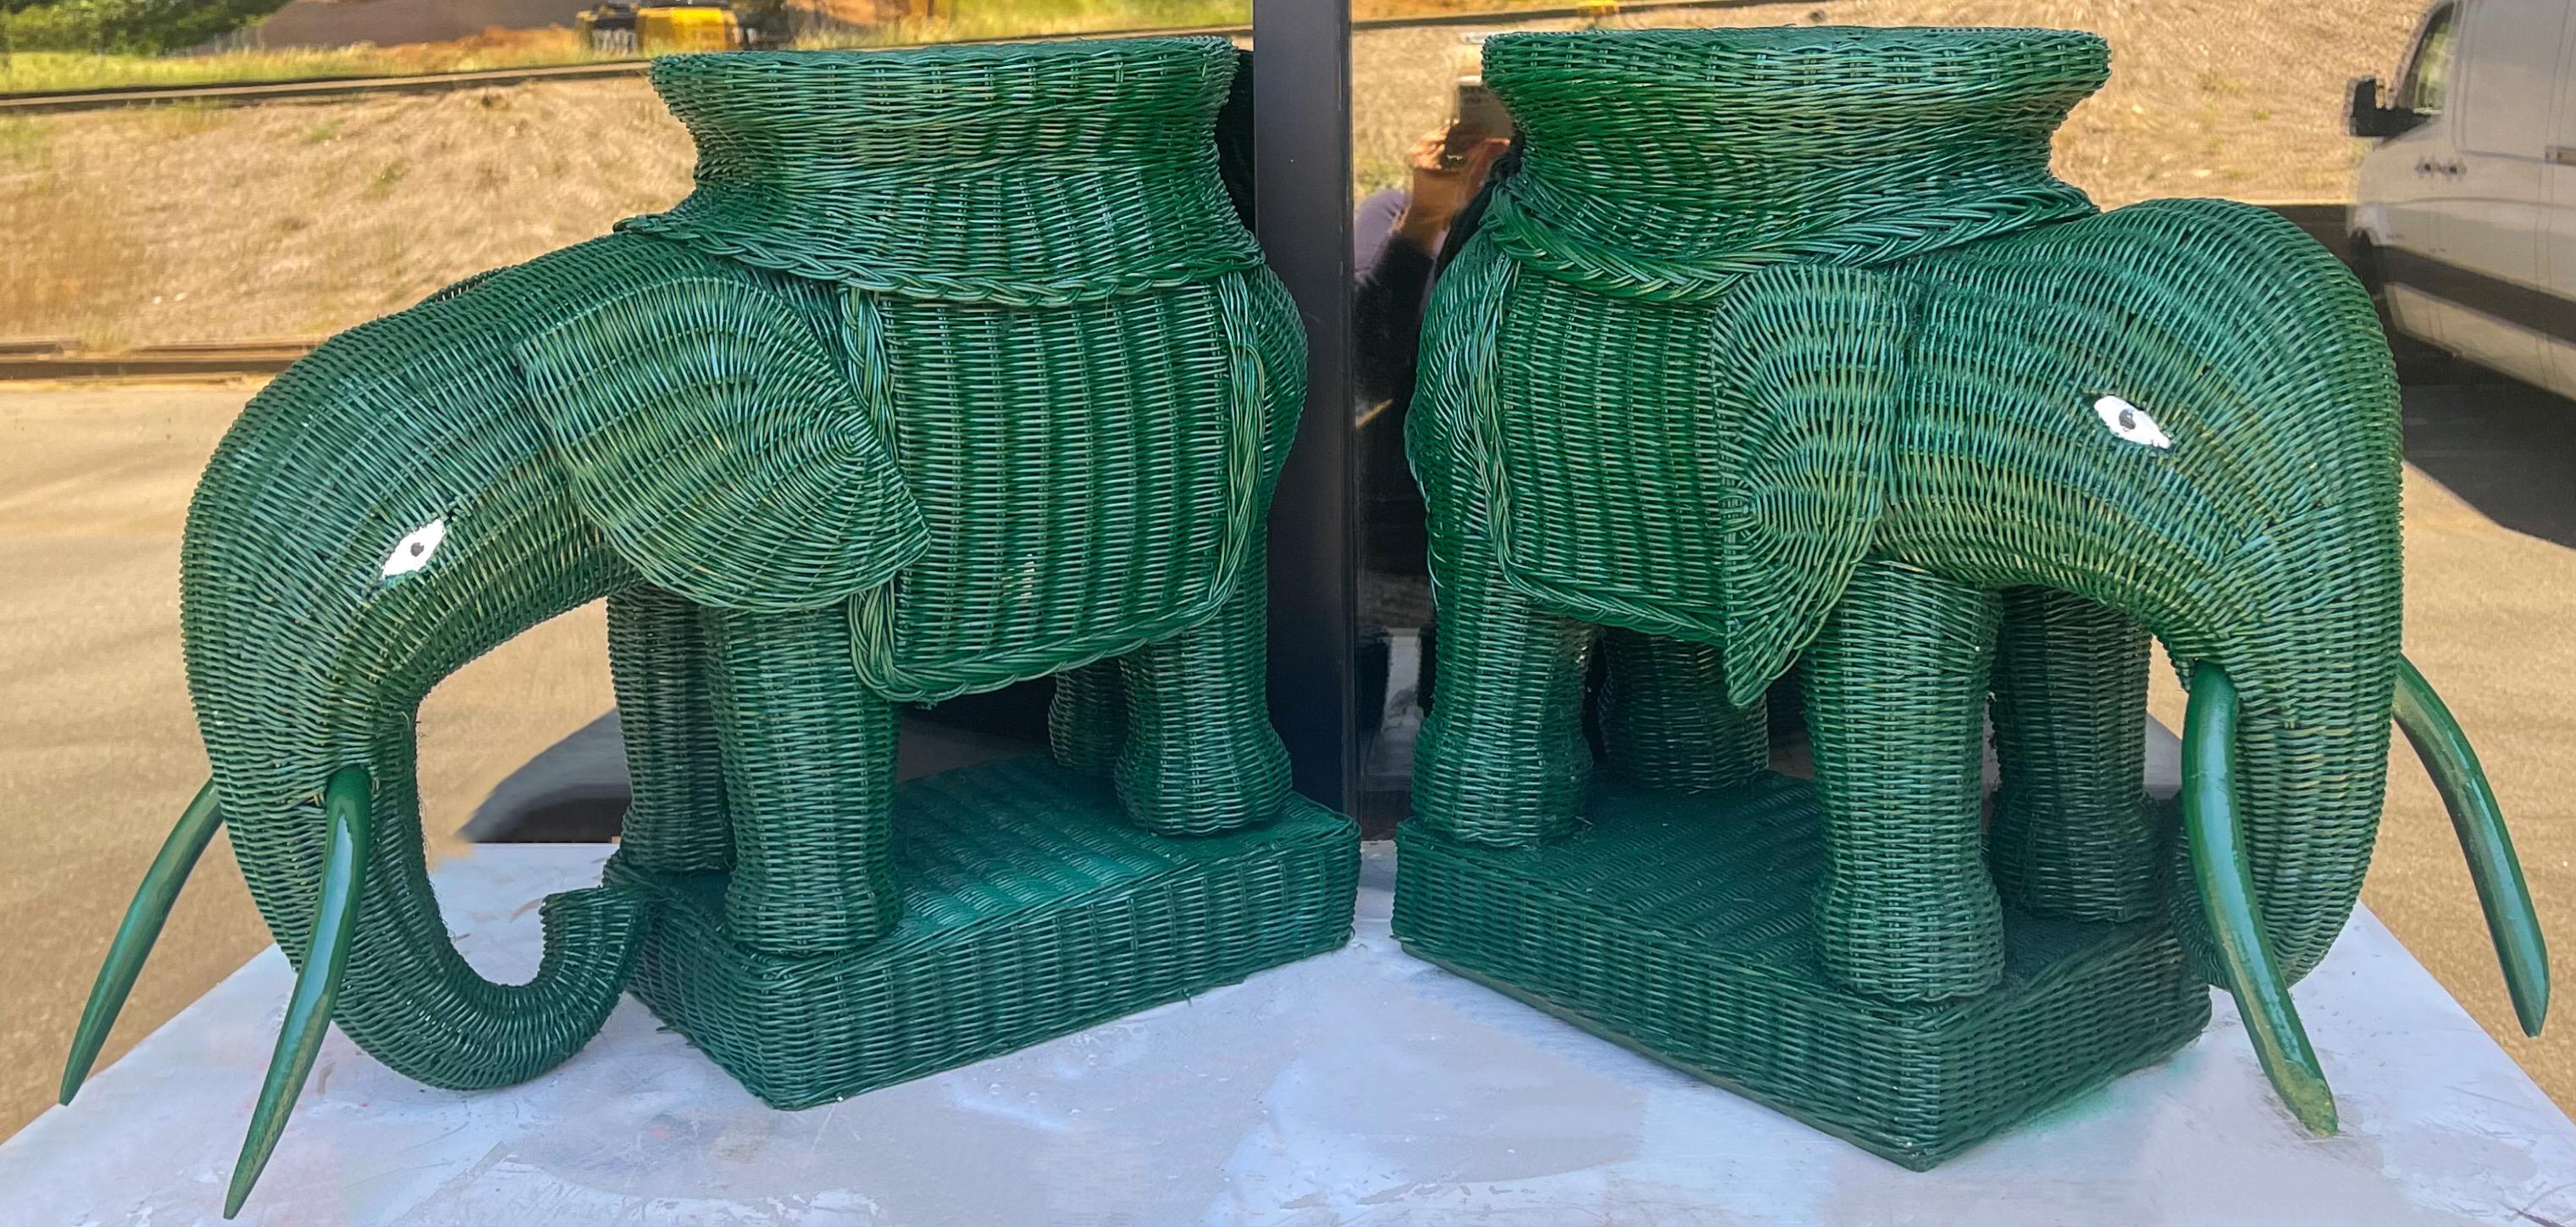 This is a fun pair of Hollywood Regency style green wicker garden elephant for side tables or stools. Please note the head differences. They came to me together, but there is a slight variation.